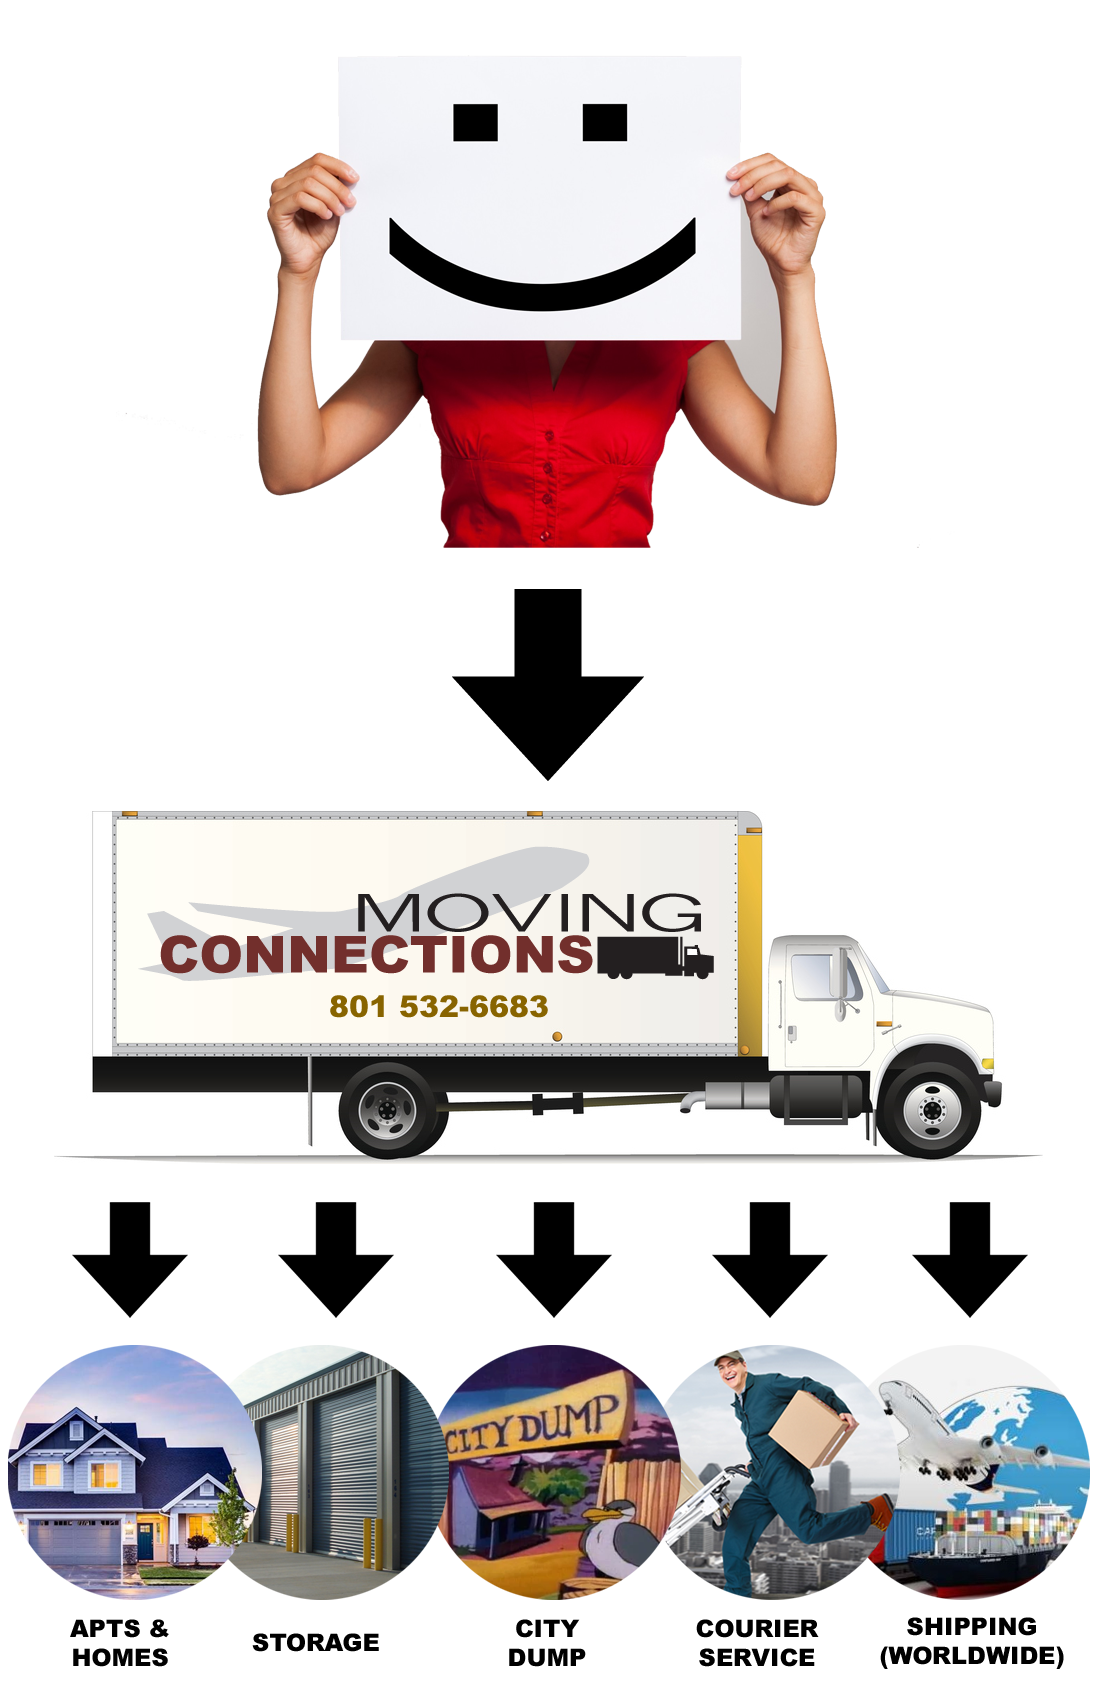 Movers and moving services - Moving Connections 801-532-6683 a moving company